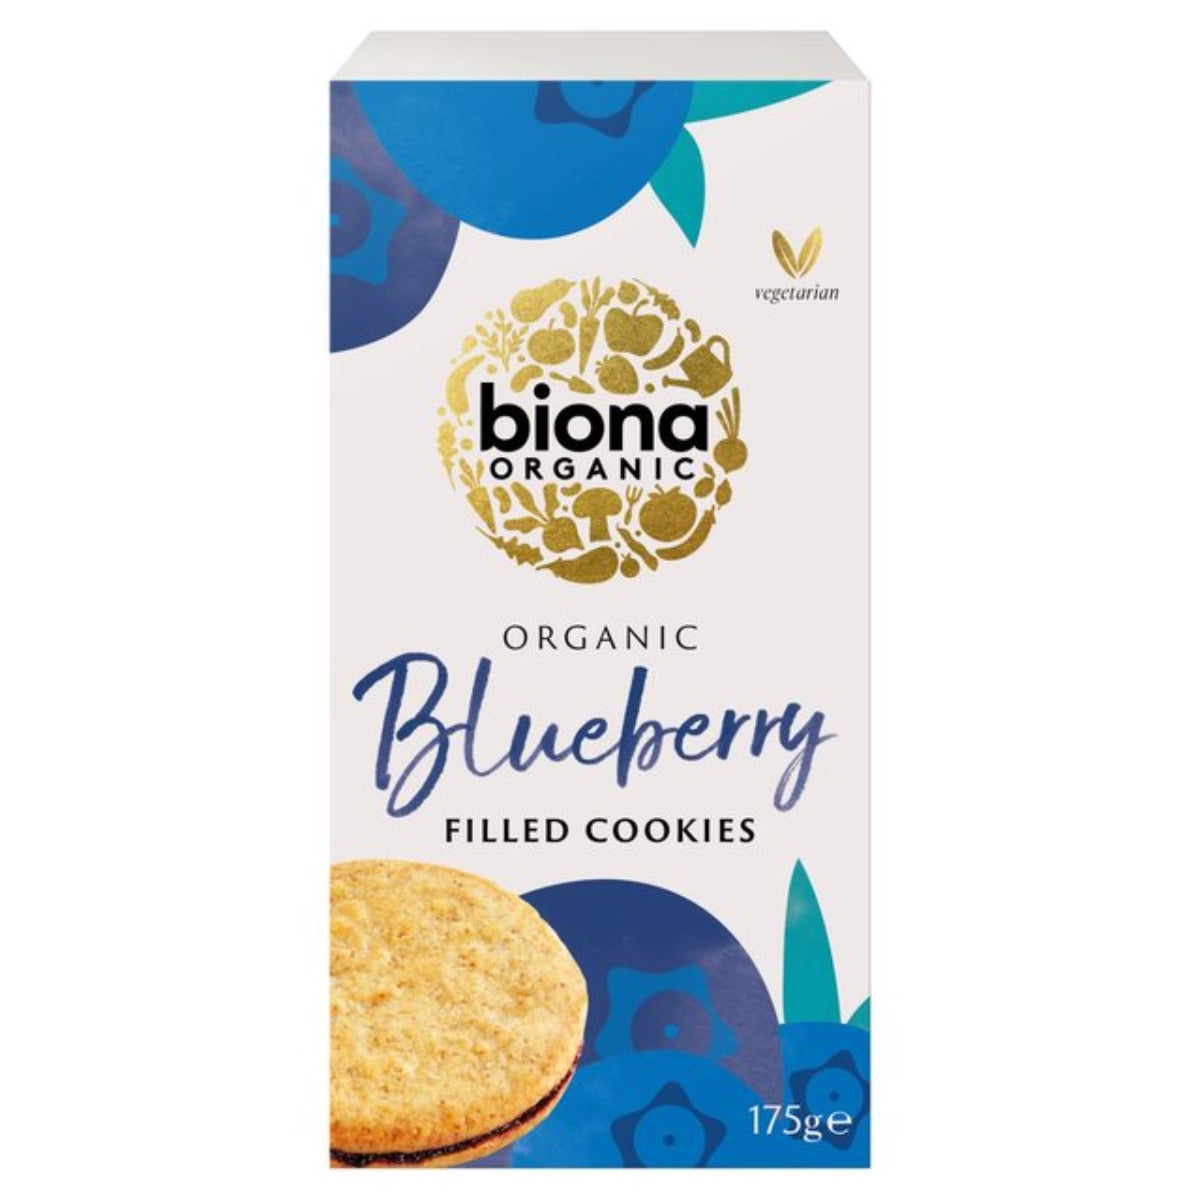 Biona Organic Blueberry Filled Cookies 175g